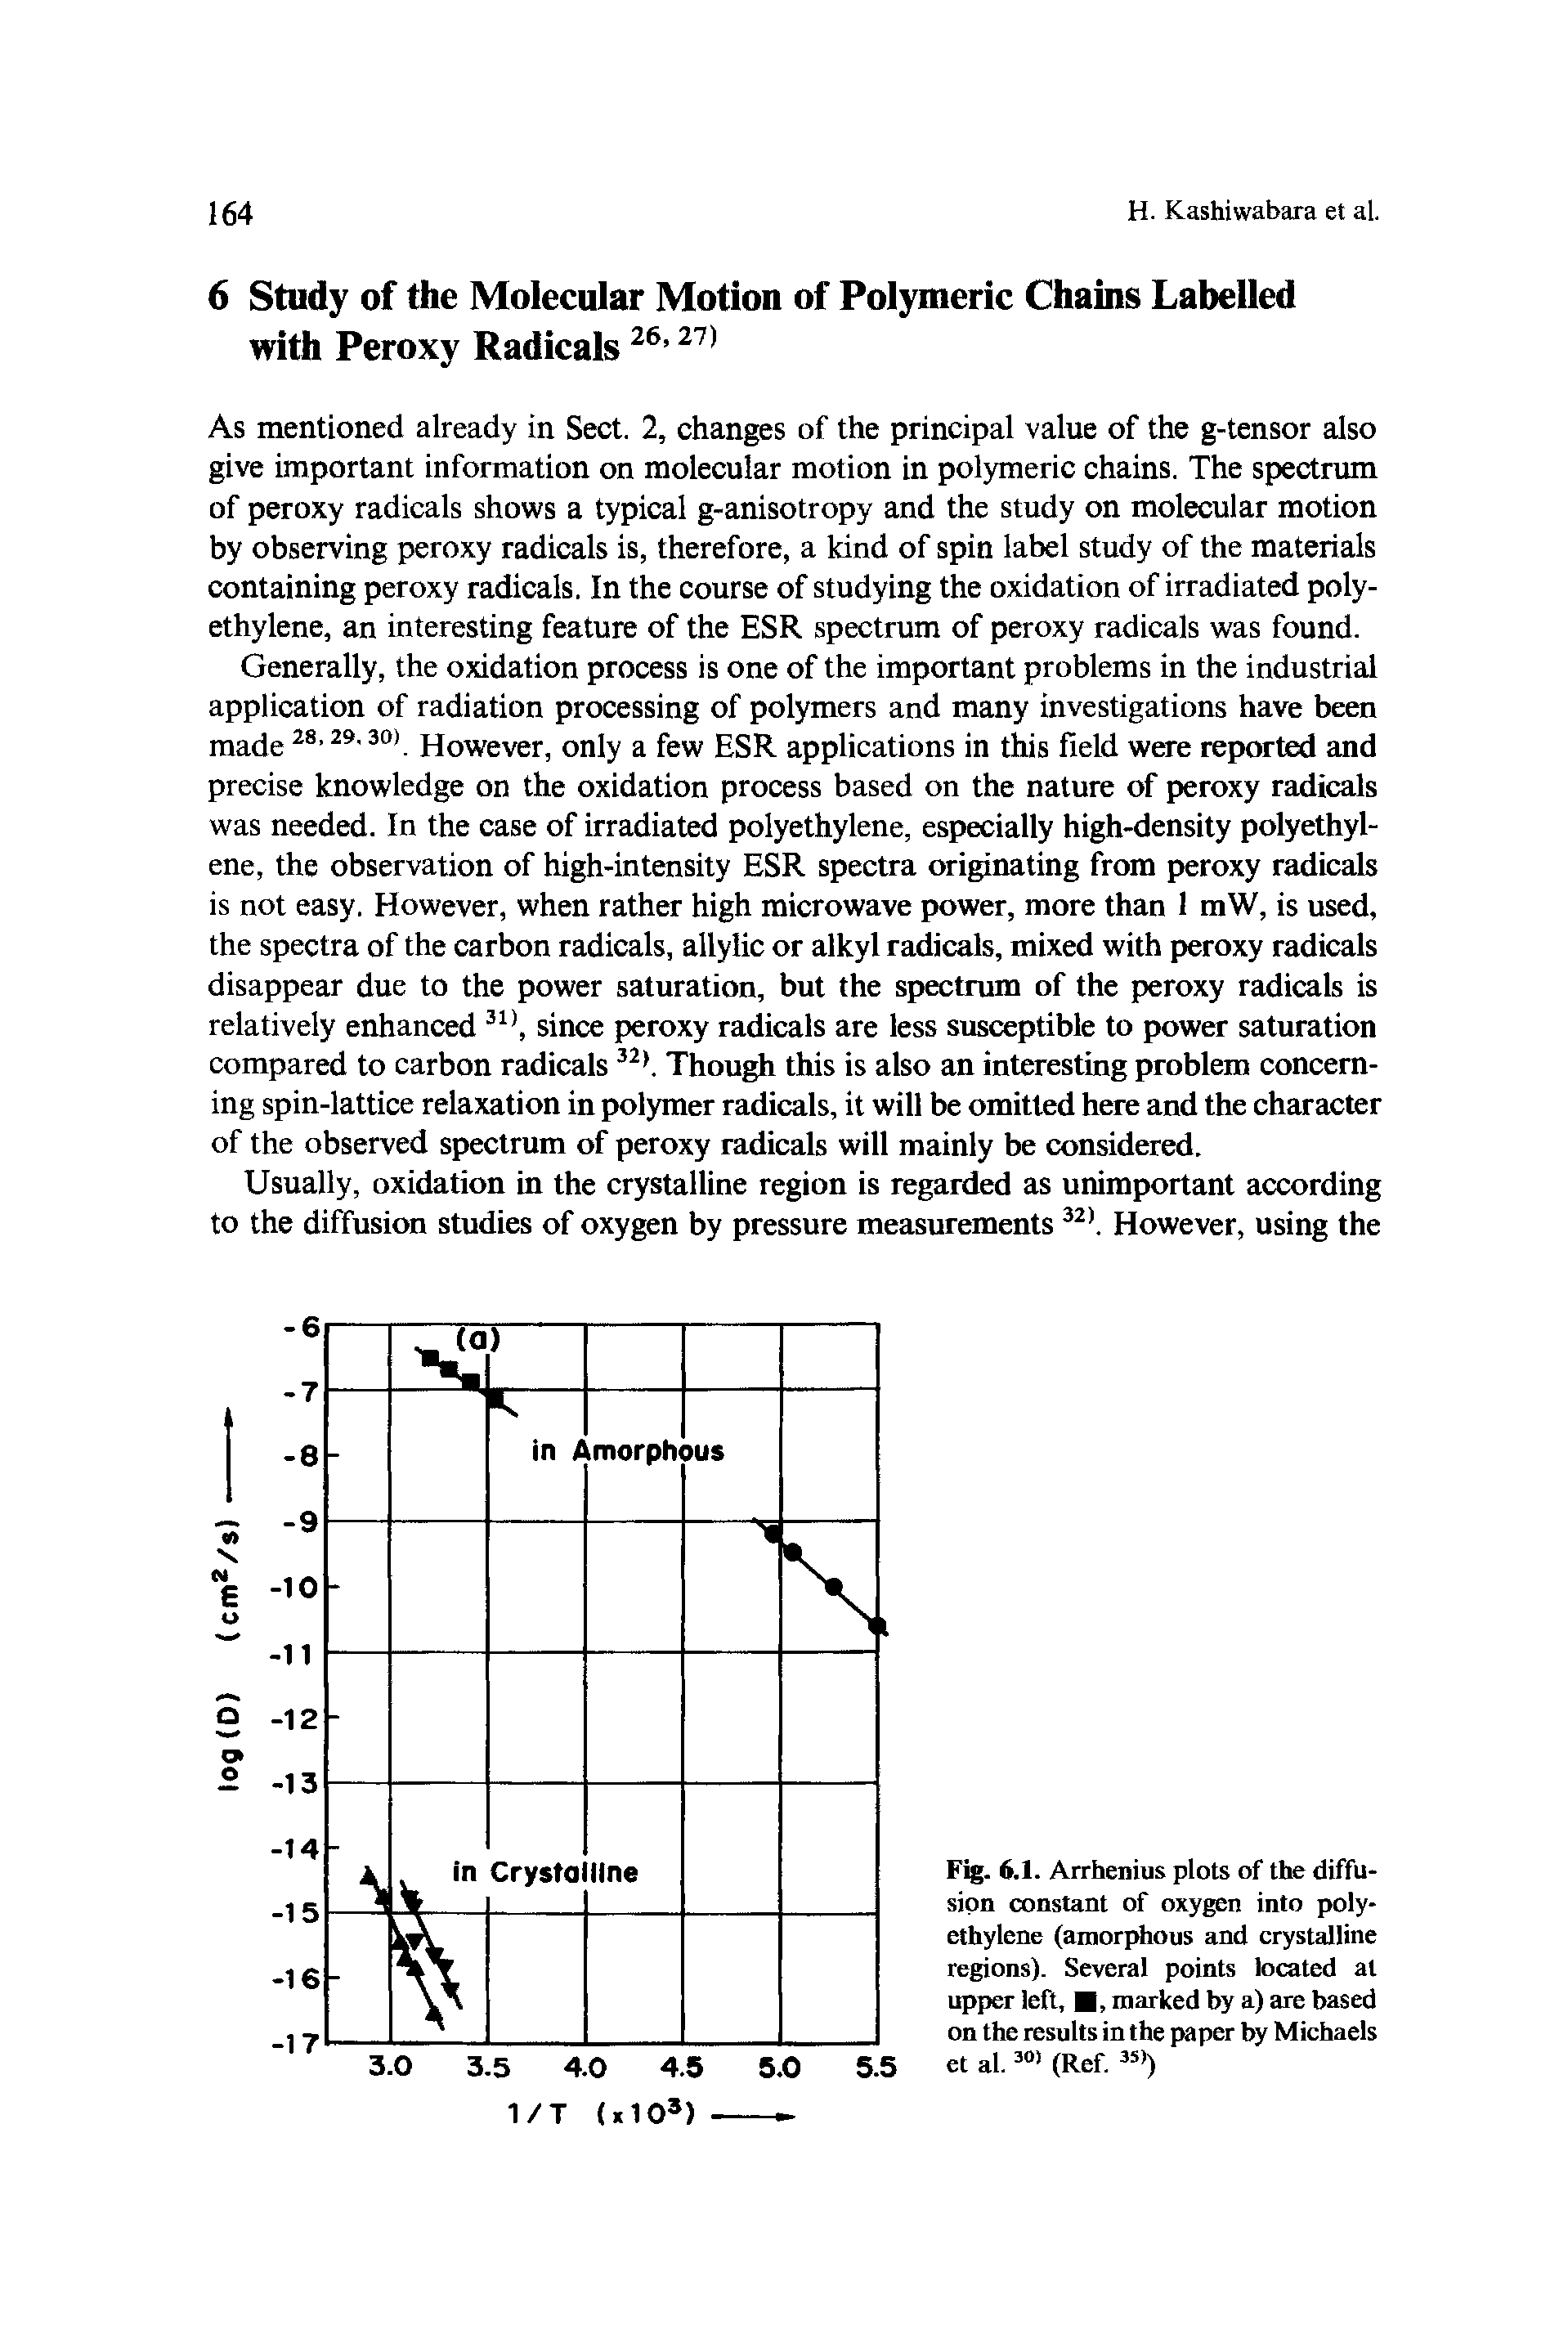 Fig. 6.1. Arrhenius plots of the diffusion constant of oxygen into polyethylene (amorphous and crystalline regions). Several points located at upper left, , marked by a) are based on the results in the paper by Michaels et al. (Ref.